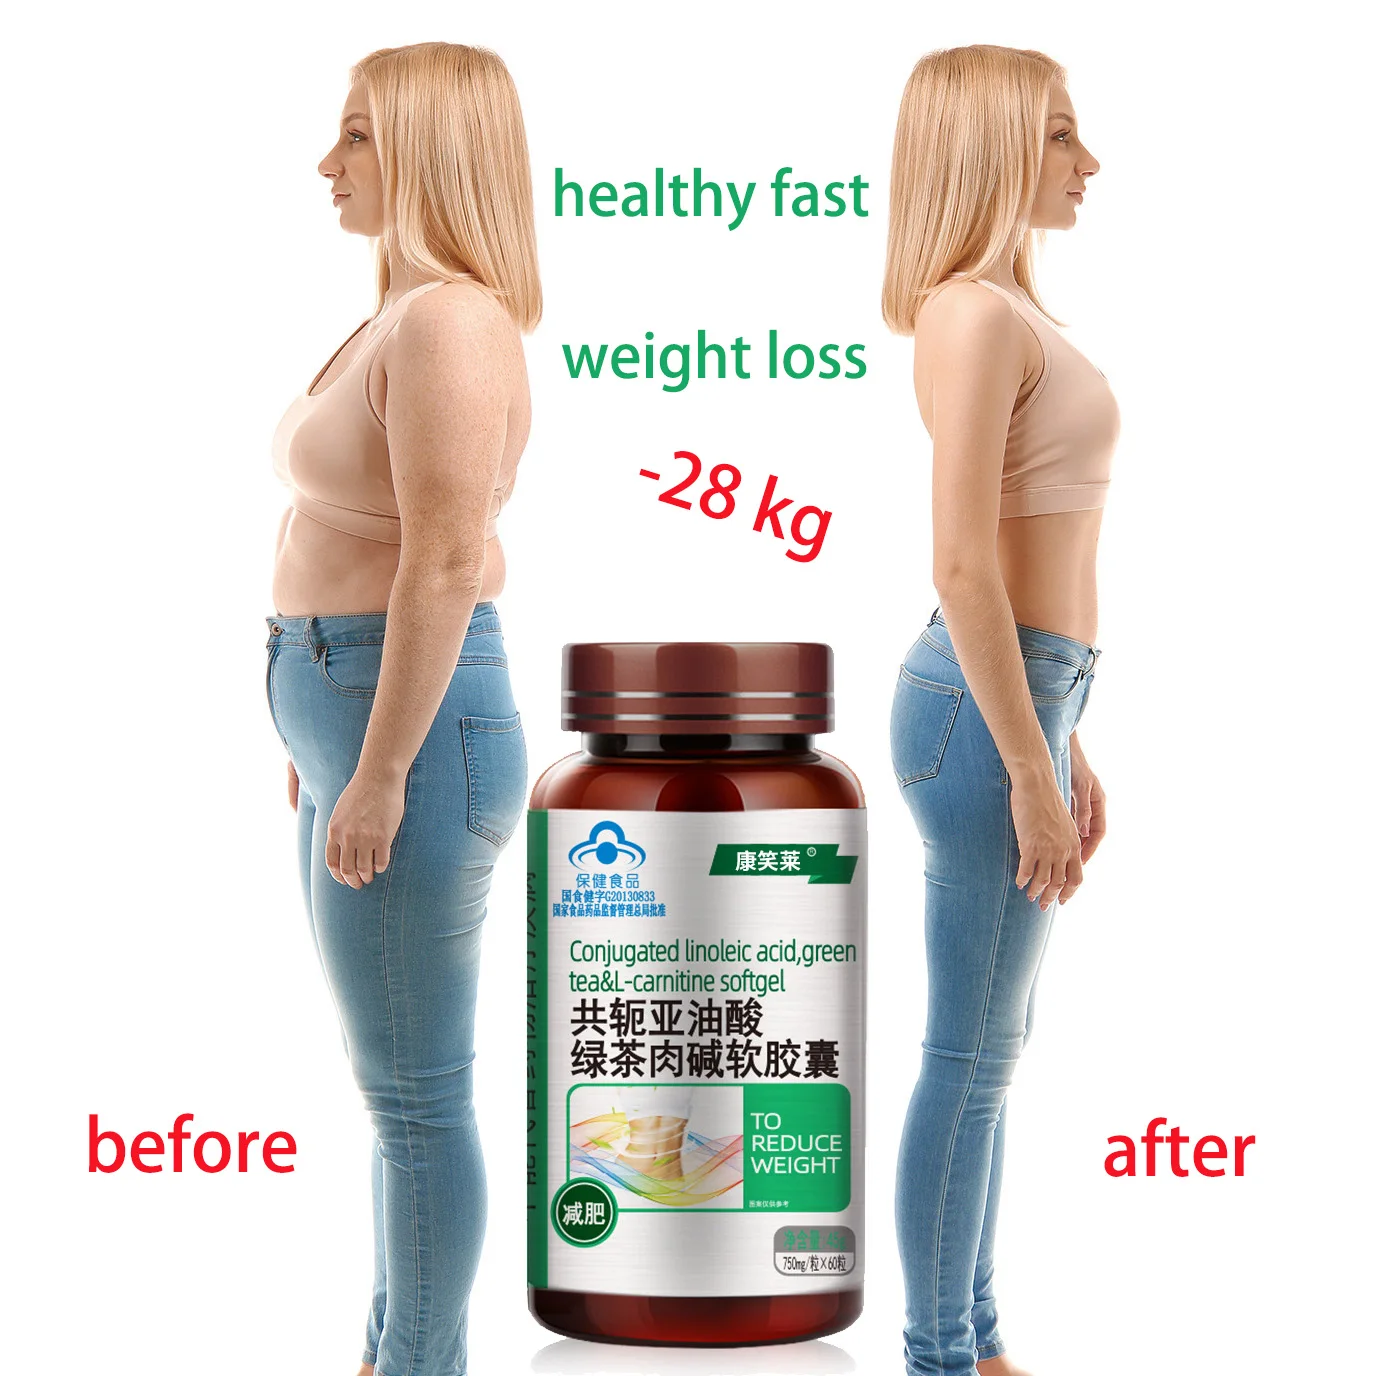 

Hot Slimming Weight Loss Diet Pills Reduce Strongest Fat Burning Conjugated Linoleic Acid Green Tea L-carnitine Capsules